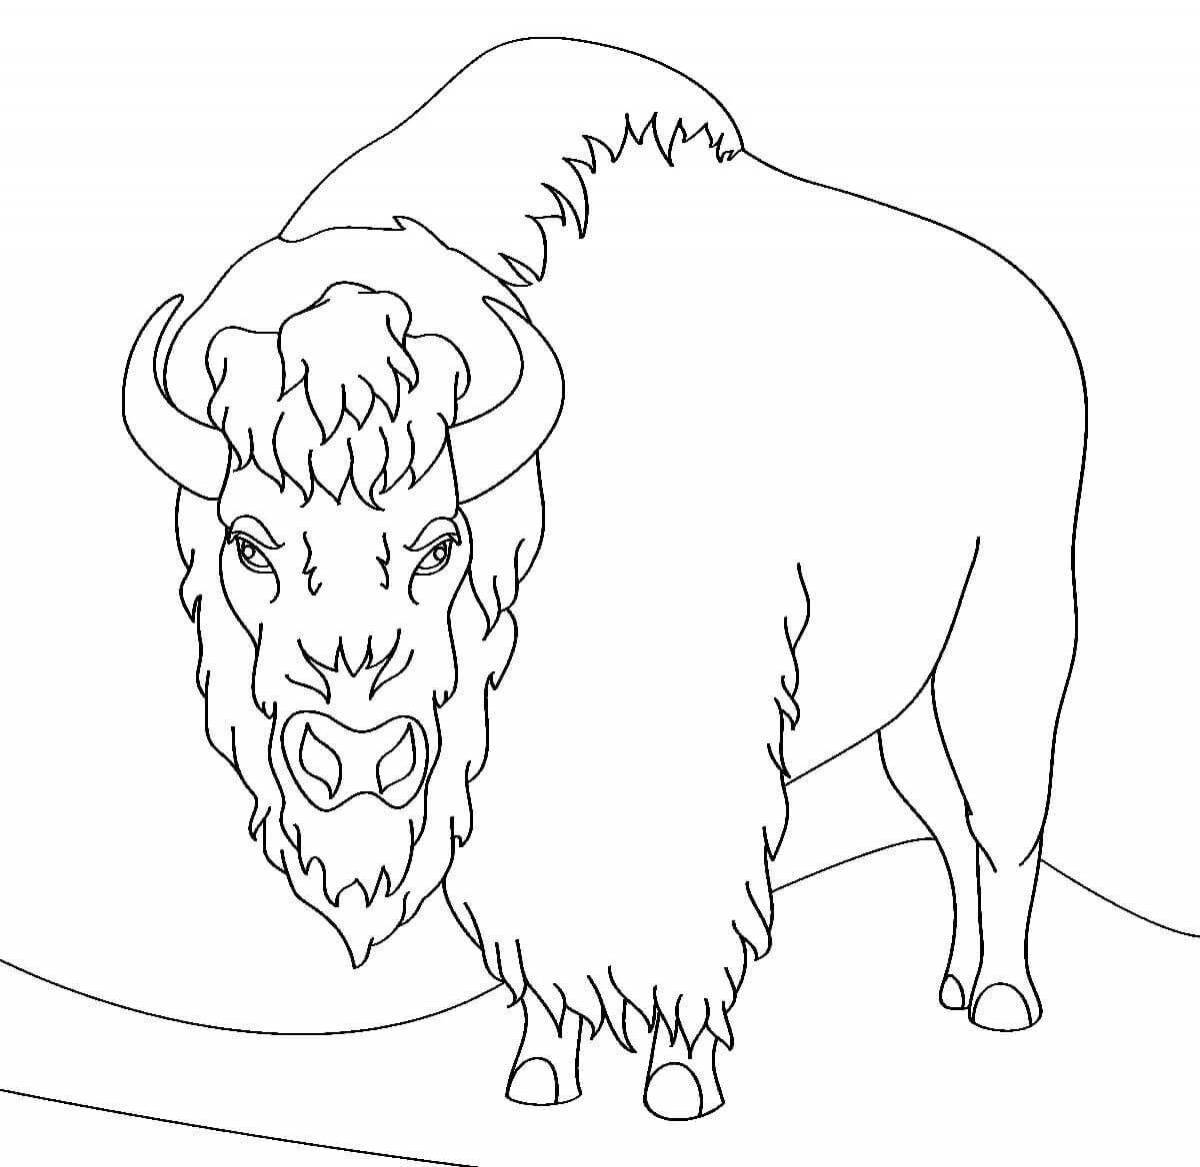 Brightly colored bison coloring page